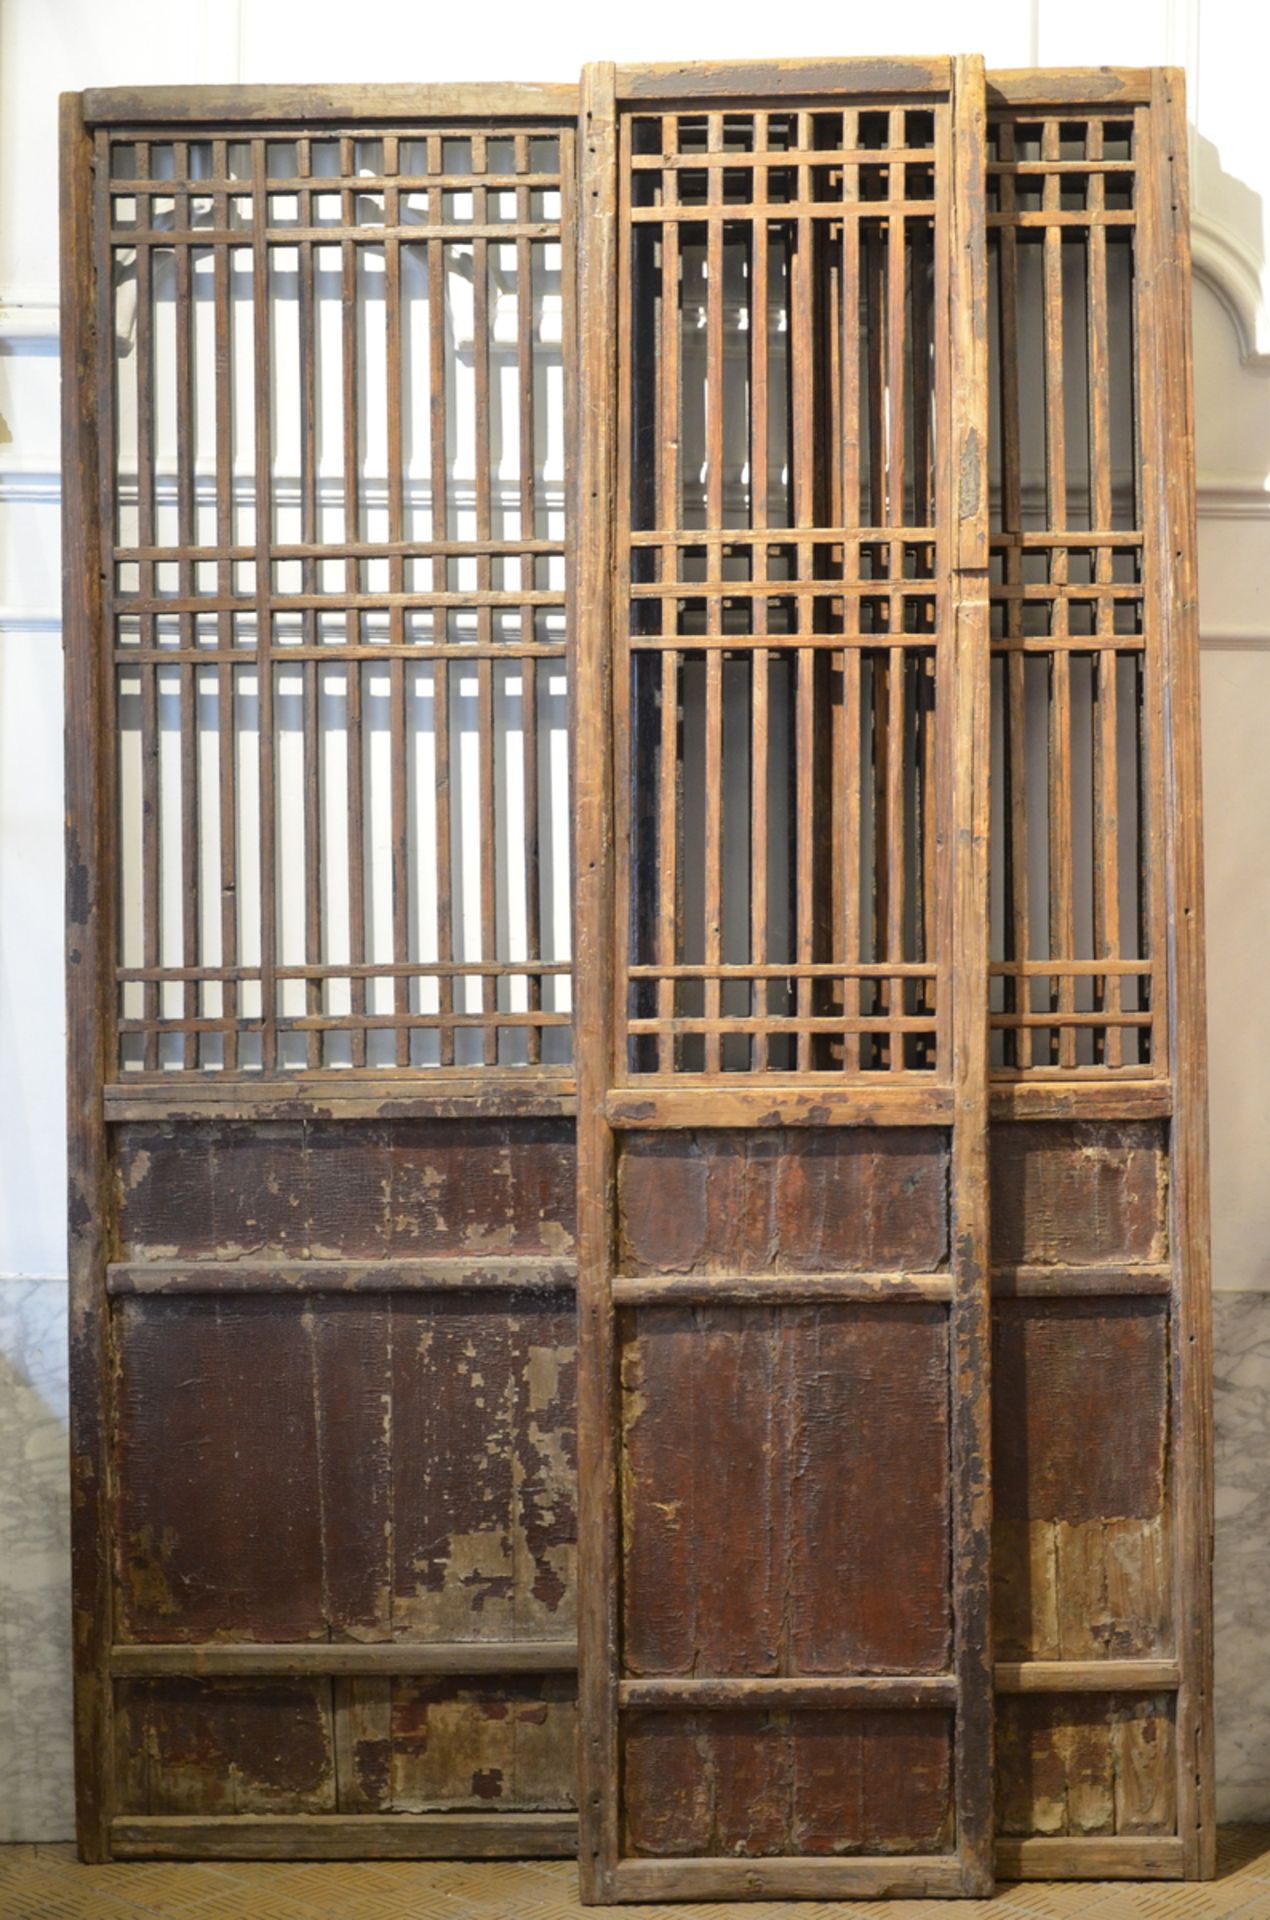 Set of 4 Chinese wooden screens - Image 3 of 3